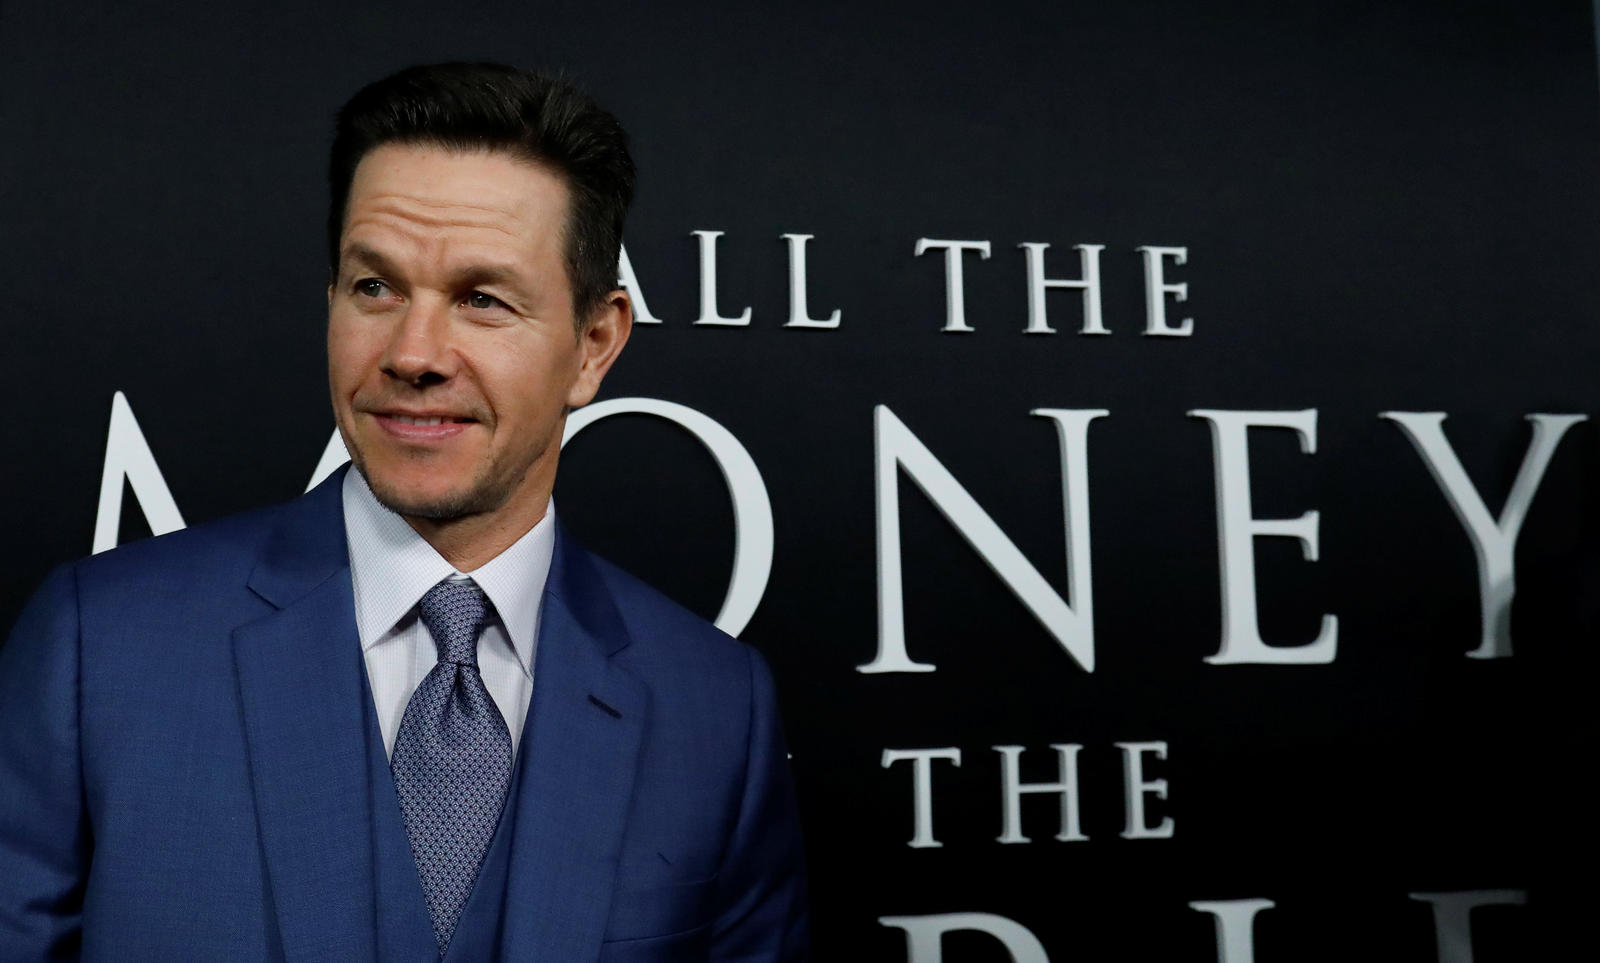 Cast member Wahlberg poses at the premiere for “All the Money in the World” in Beverly Hills